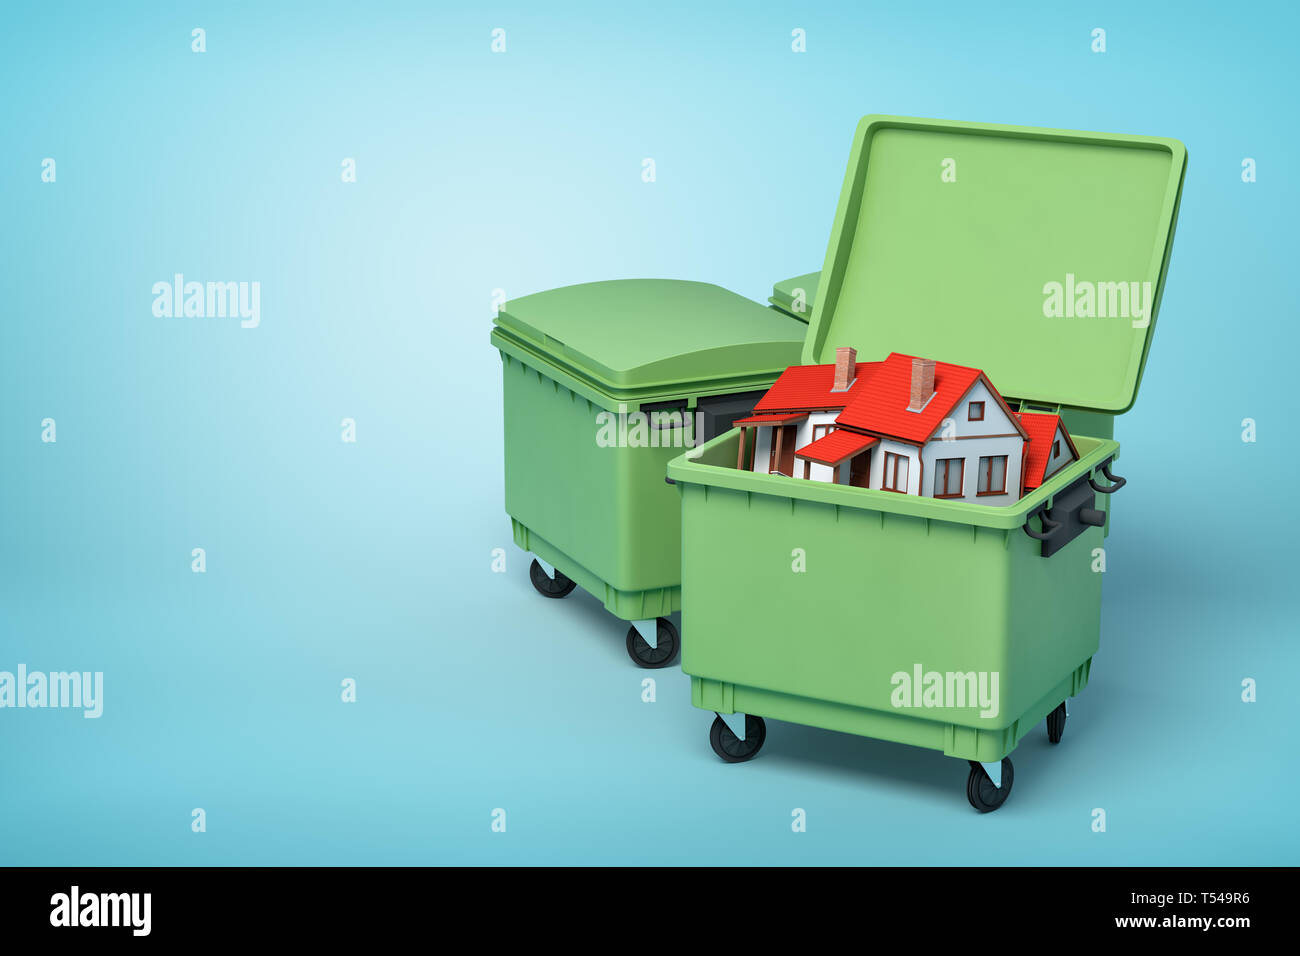 3d rendering of green trash bins with small white houses inside on blue background Stock Photo